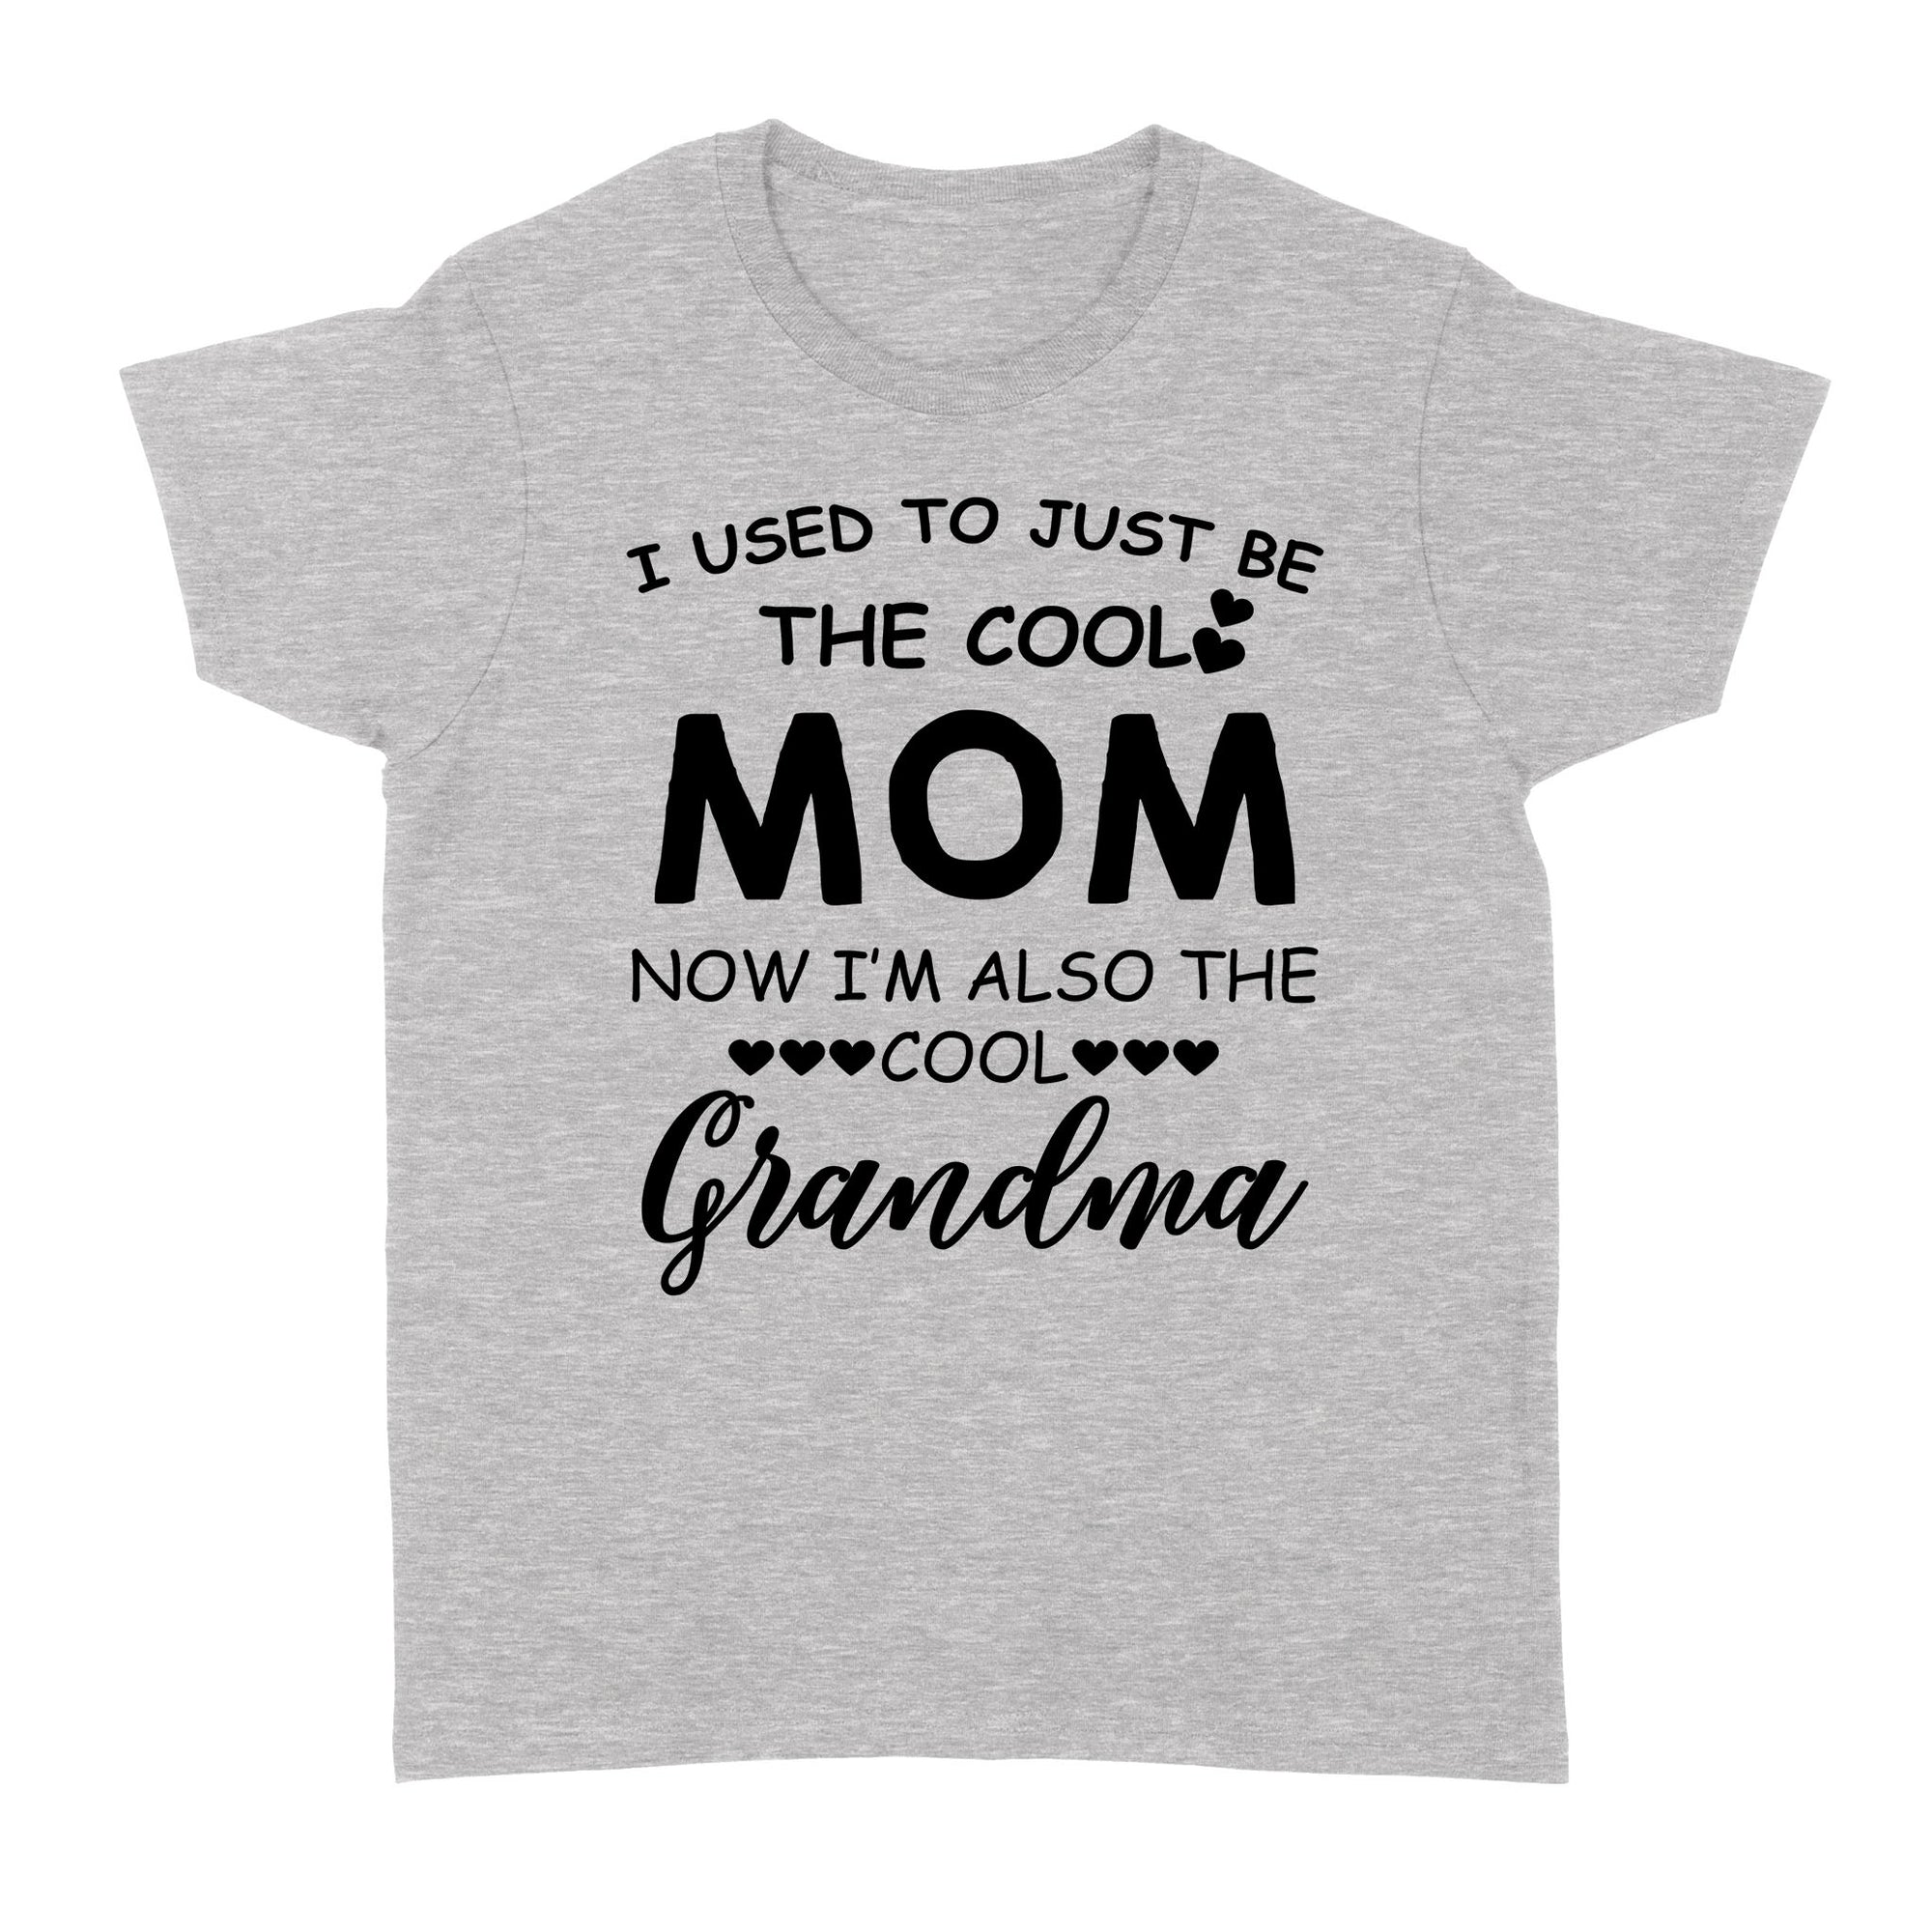 I Used To Just Be The Cool Mom Now I'm Also The Cool Grandma w Funny Gift Ideas for Grandma - Standard Women's T-shirt